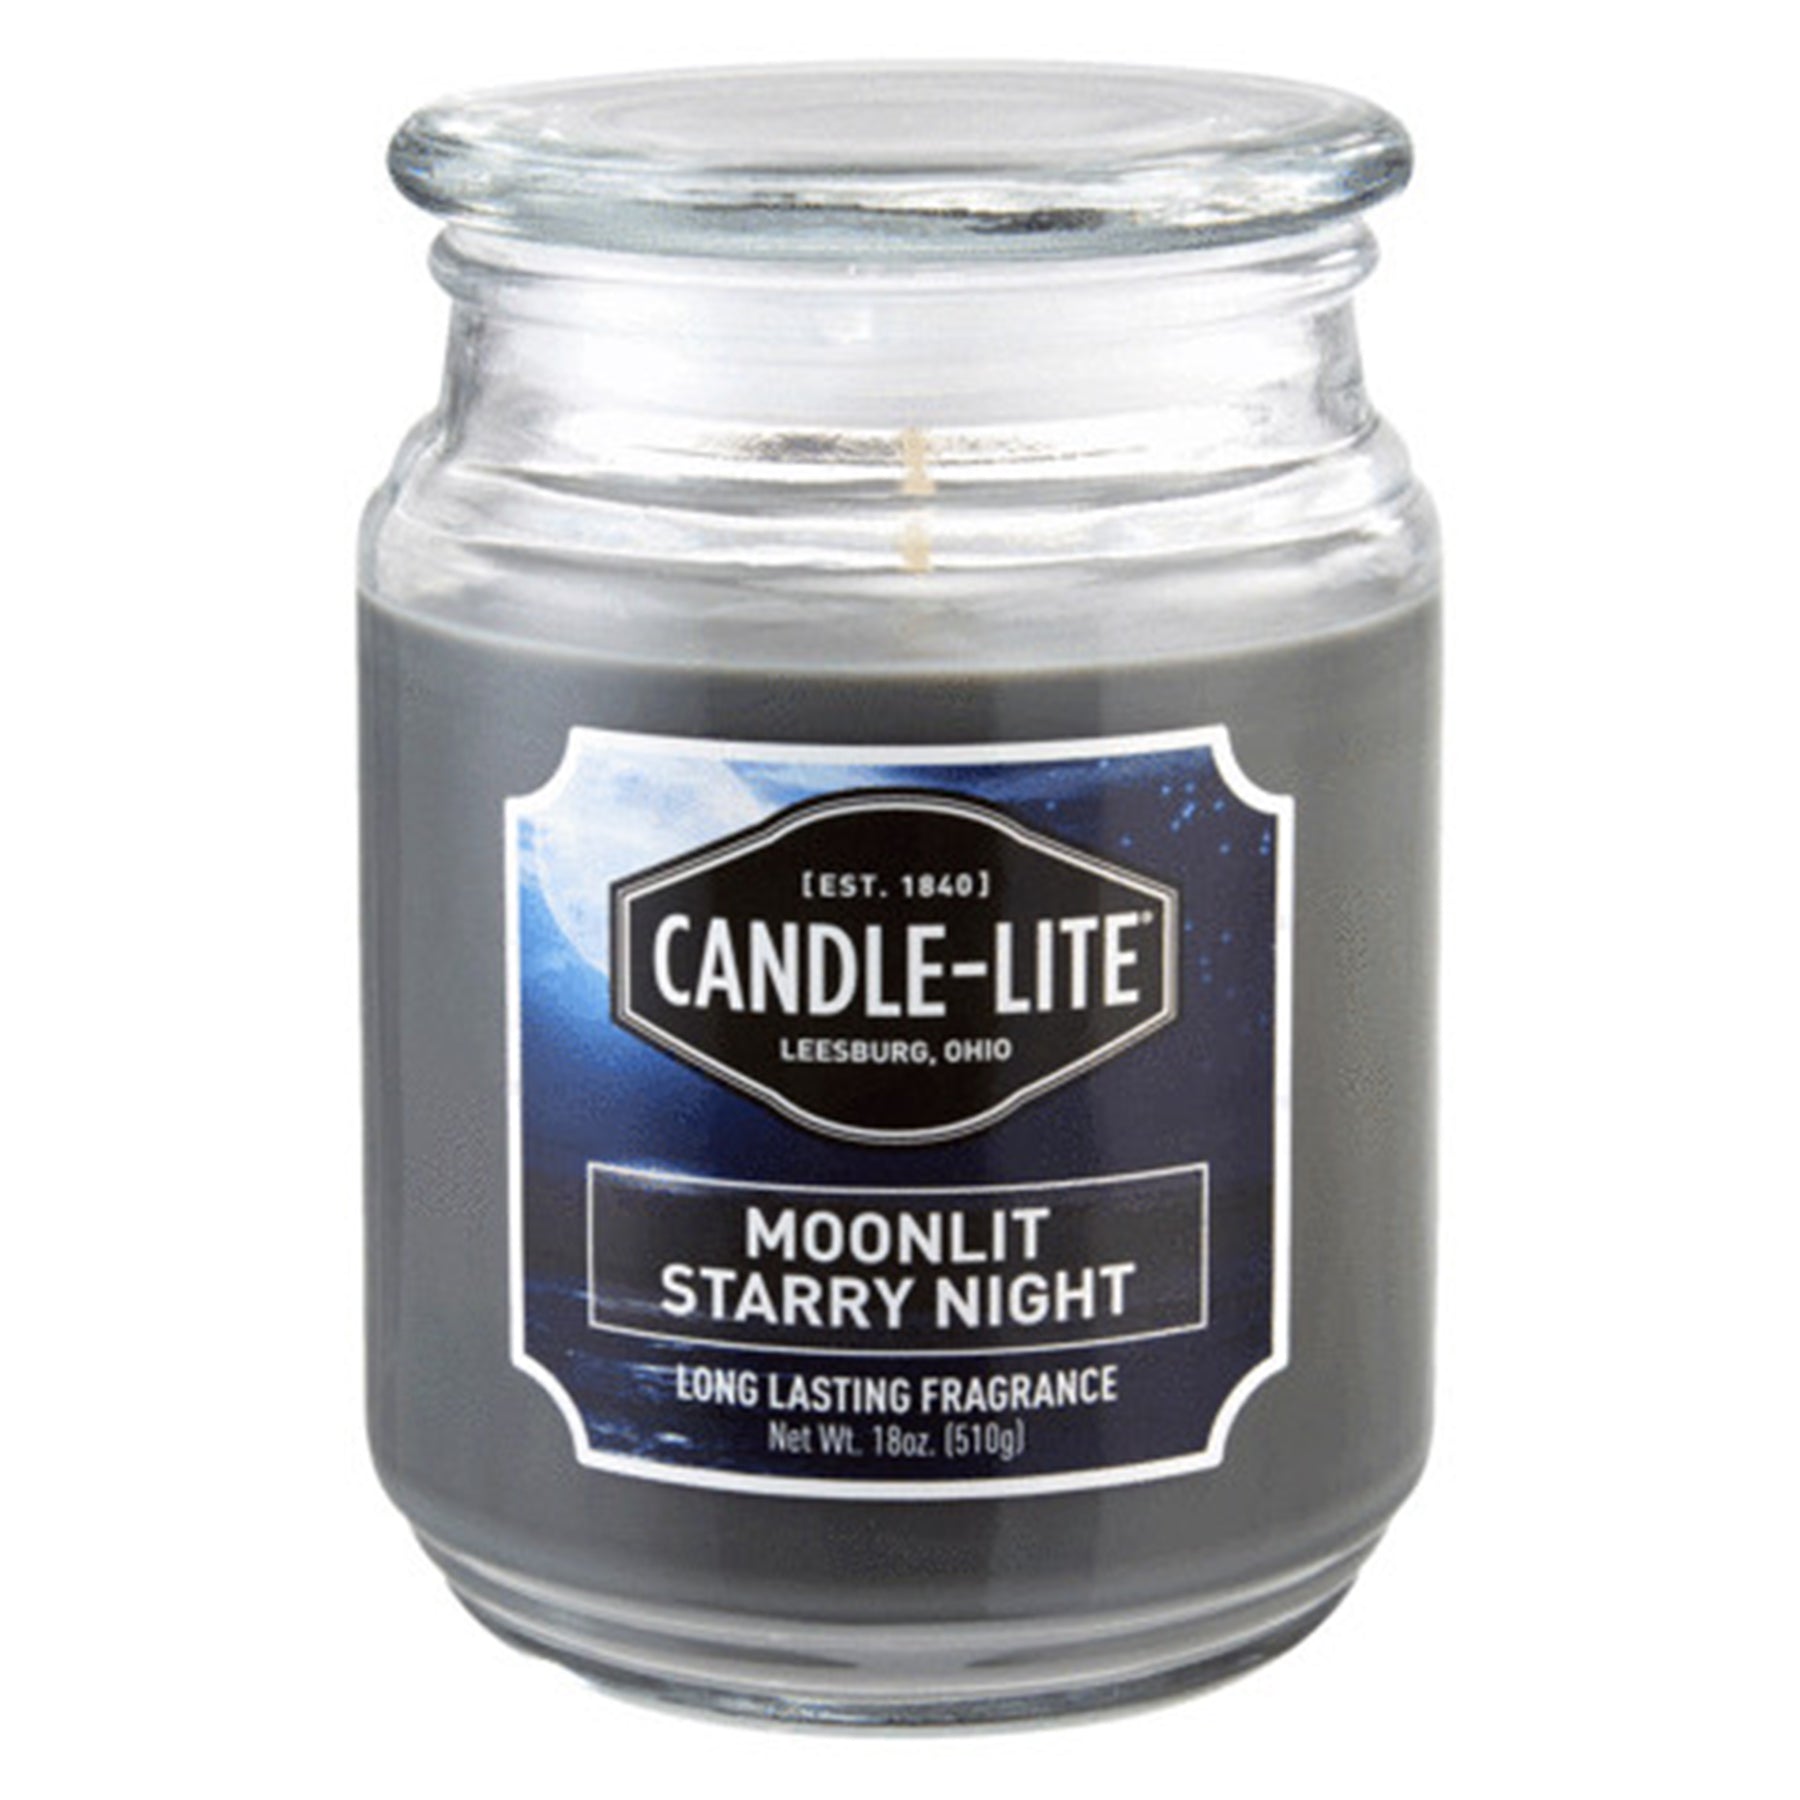 Candle with Fragrance - Moonlit Starry Night